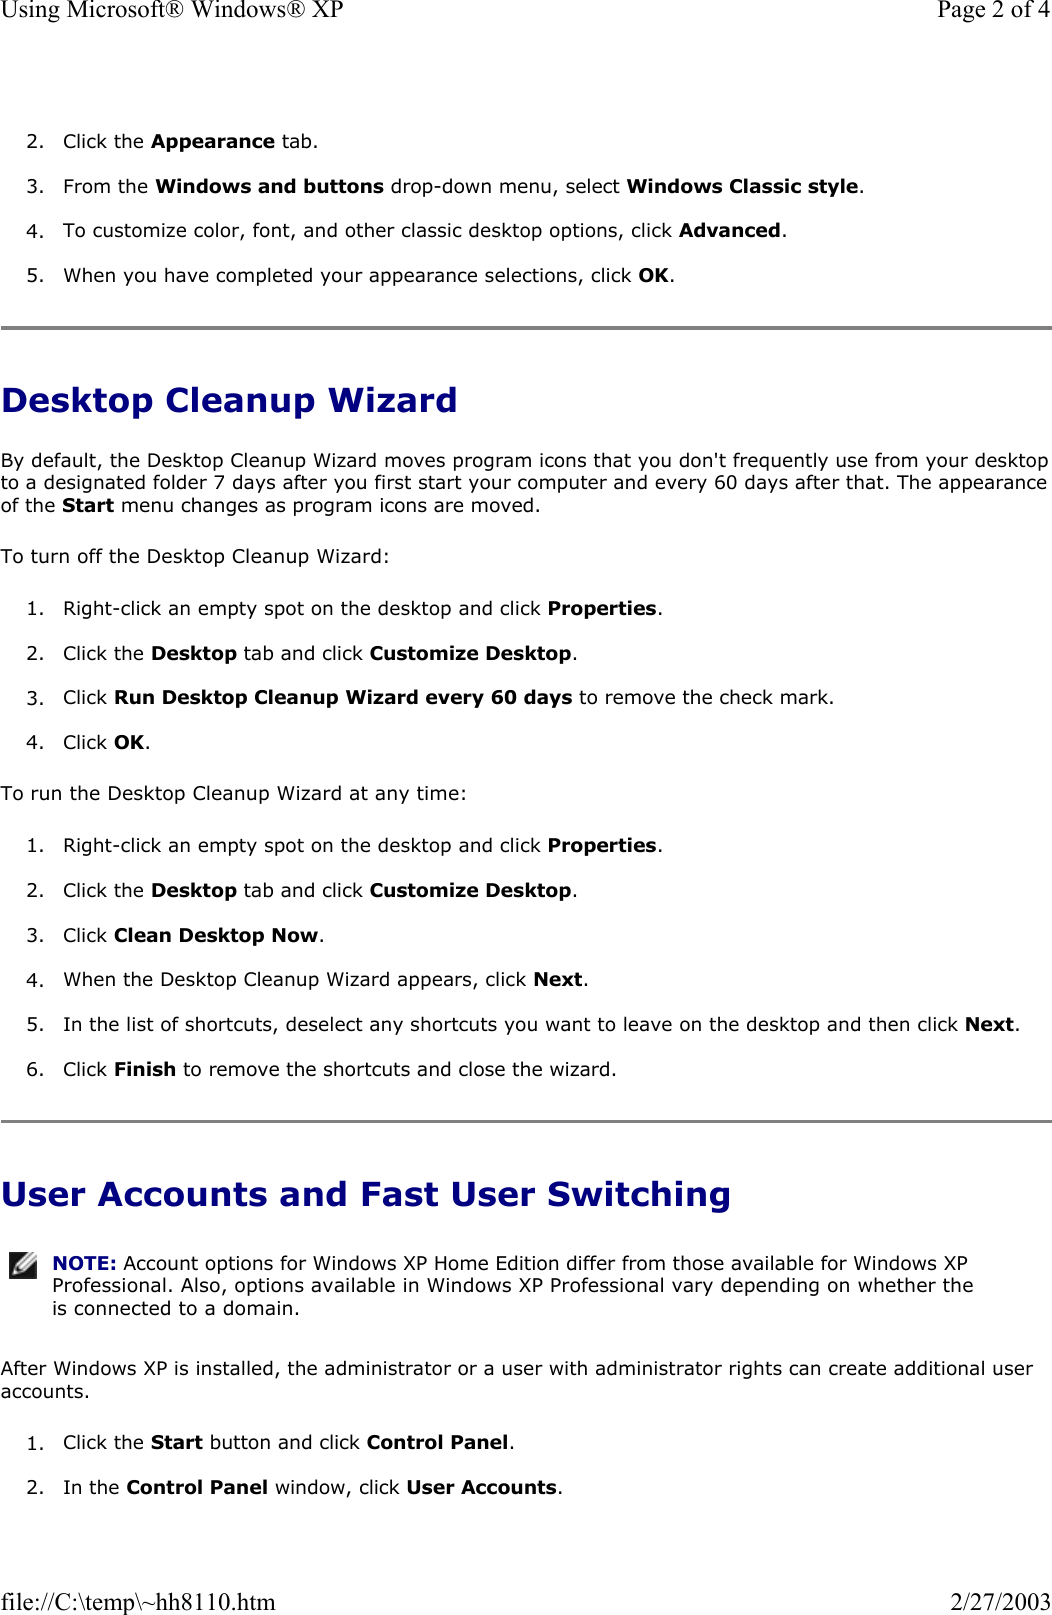  2. Click the Appearance tab.   3. From the Windows and buttons drop-down menu, select Windows Classic style.  4. To customize color, font, and other classic desktop options, click Advanced.  5. When you have completed your appearance selections, click OK.  Desktop Cleanup Wizard By default, the Desktop Cleanup Wizard moves program icons that you don&apos;t frequently use from your desktopto a designated folder 7 days after you first start your computer and every 60 days after that. The appearance of the Start menu changes as program icons are moved.  To turn off the Desktop Cleanup Wizard: 1. Right-click an empty spot on the desktop and click Properties.  2. Click the Desktop tab and click Customize Desktop.  3. Click Run Desktop Cleanup Wizard every 60 days to remove the check mark.  4. Click OK.  To run the Desktop Cleanup Wizard at any time: 1. Right-click an empty spot on the desktop and click Properties.  2. Click the Desktop tab and click Customize Desktop.  3. Click Clean Desktop Now.  4. When the Desktop Cleanup Wizard appears, click Next.  5. In the list of shortcuts, deselect any shortcuts you want to leave on the desktop and then click Next.  6. Click Finish to remove the shortcuts and close the wizard.  User Accounts and Fast User Switching After Windows XP is installed, the administrator or a user with administrator rights can create additional user accounts. 1. Click the Start button and click Control Panel.  2. In the Control Panel window, click User Accounts. NOTE: Account options for Windows XP Home Edition differ from those available for Windows XP Professional. Also, options available in Windows XP Professional vary depending on whether the is connected to a domain.Page 2 of 4Using Microsoft® Windows® XP2/27/2003file://C:\temp\~hh8110.htm